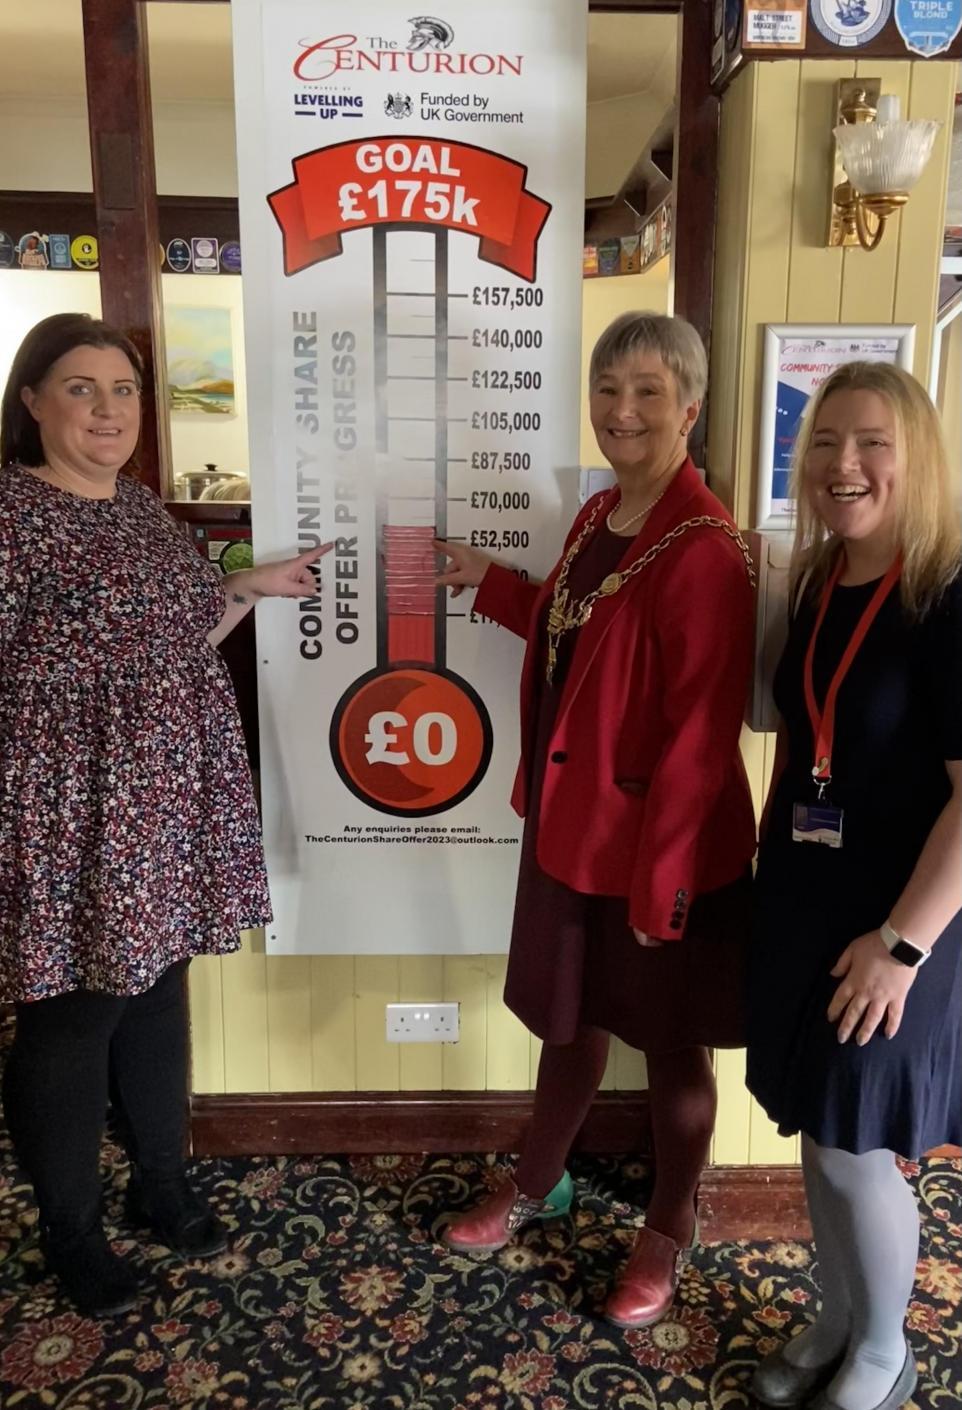 Management committee chair Claire Sinnott with civic leader Sheila Little and Great Boughton councillor Elizabeth MacGlashan, during the community share offer drive. (Image: Paul Chamberlain)